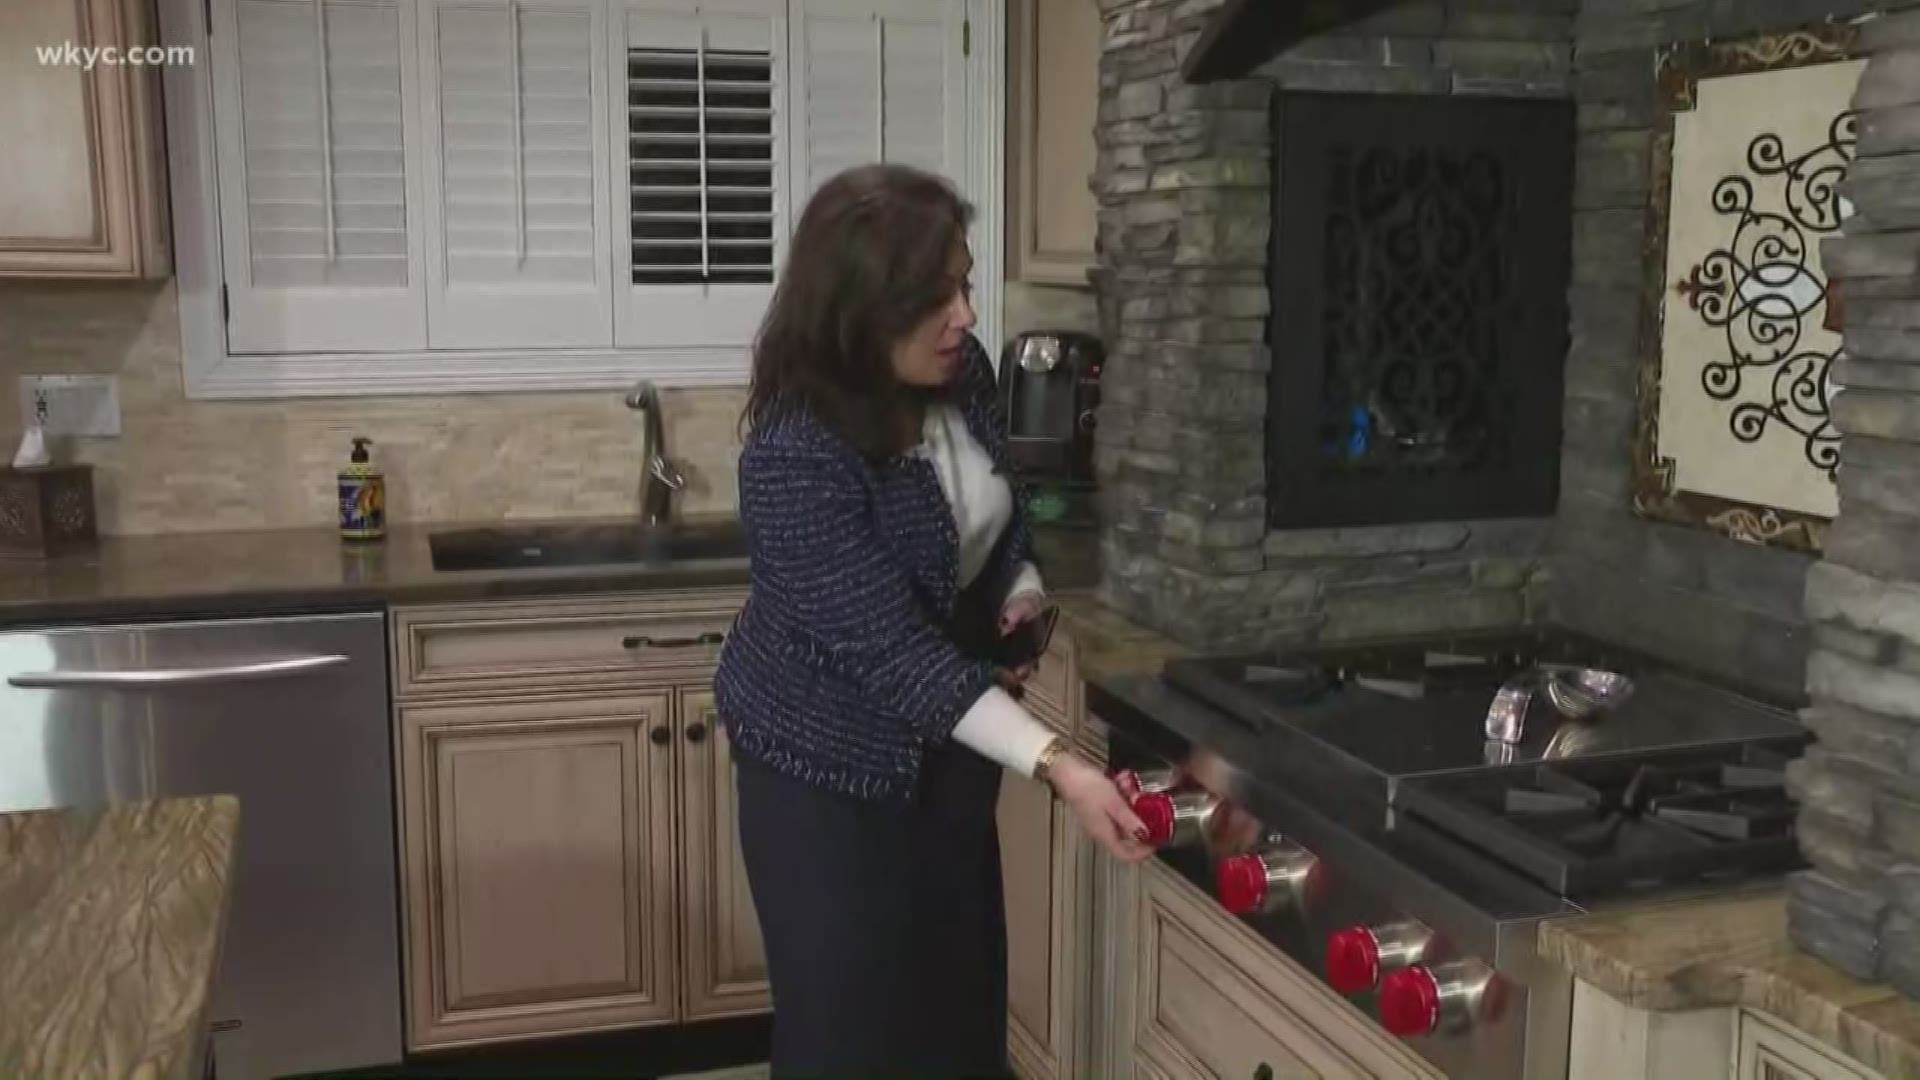 Unlike a fire, carbon monoxide can kill without a warning.  Consumer Investigator Danielle Serino tells us about the risks and how you can keep your loved ones safe